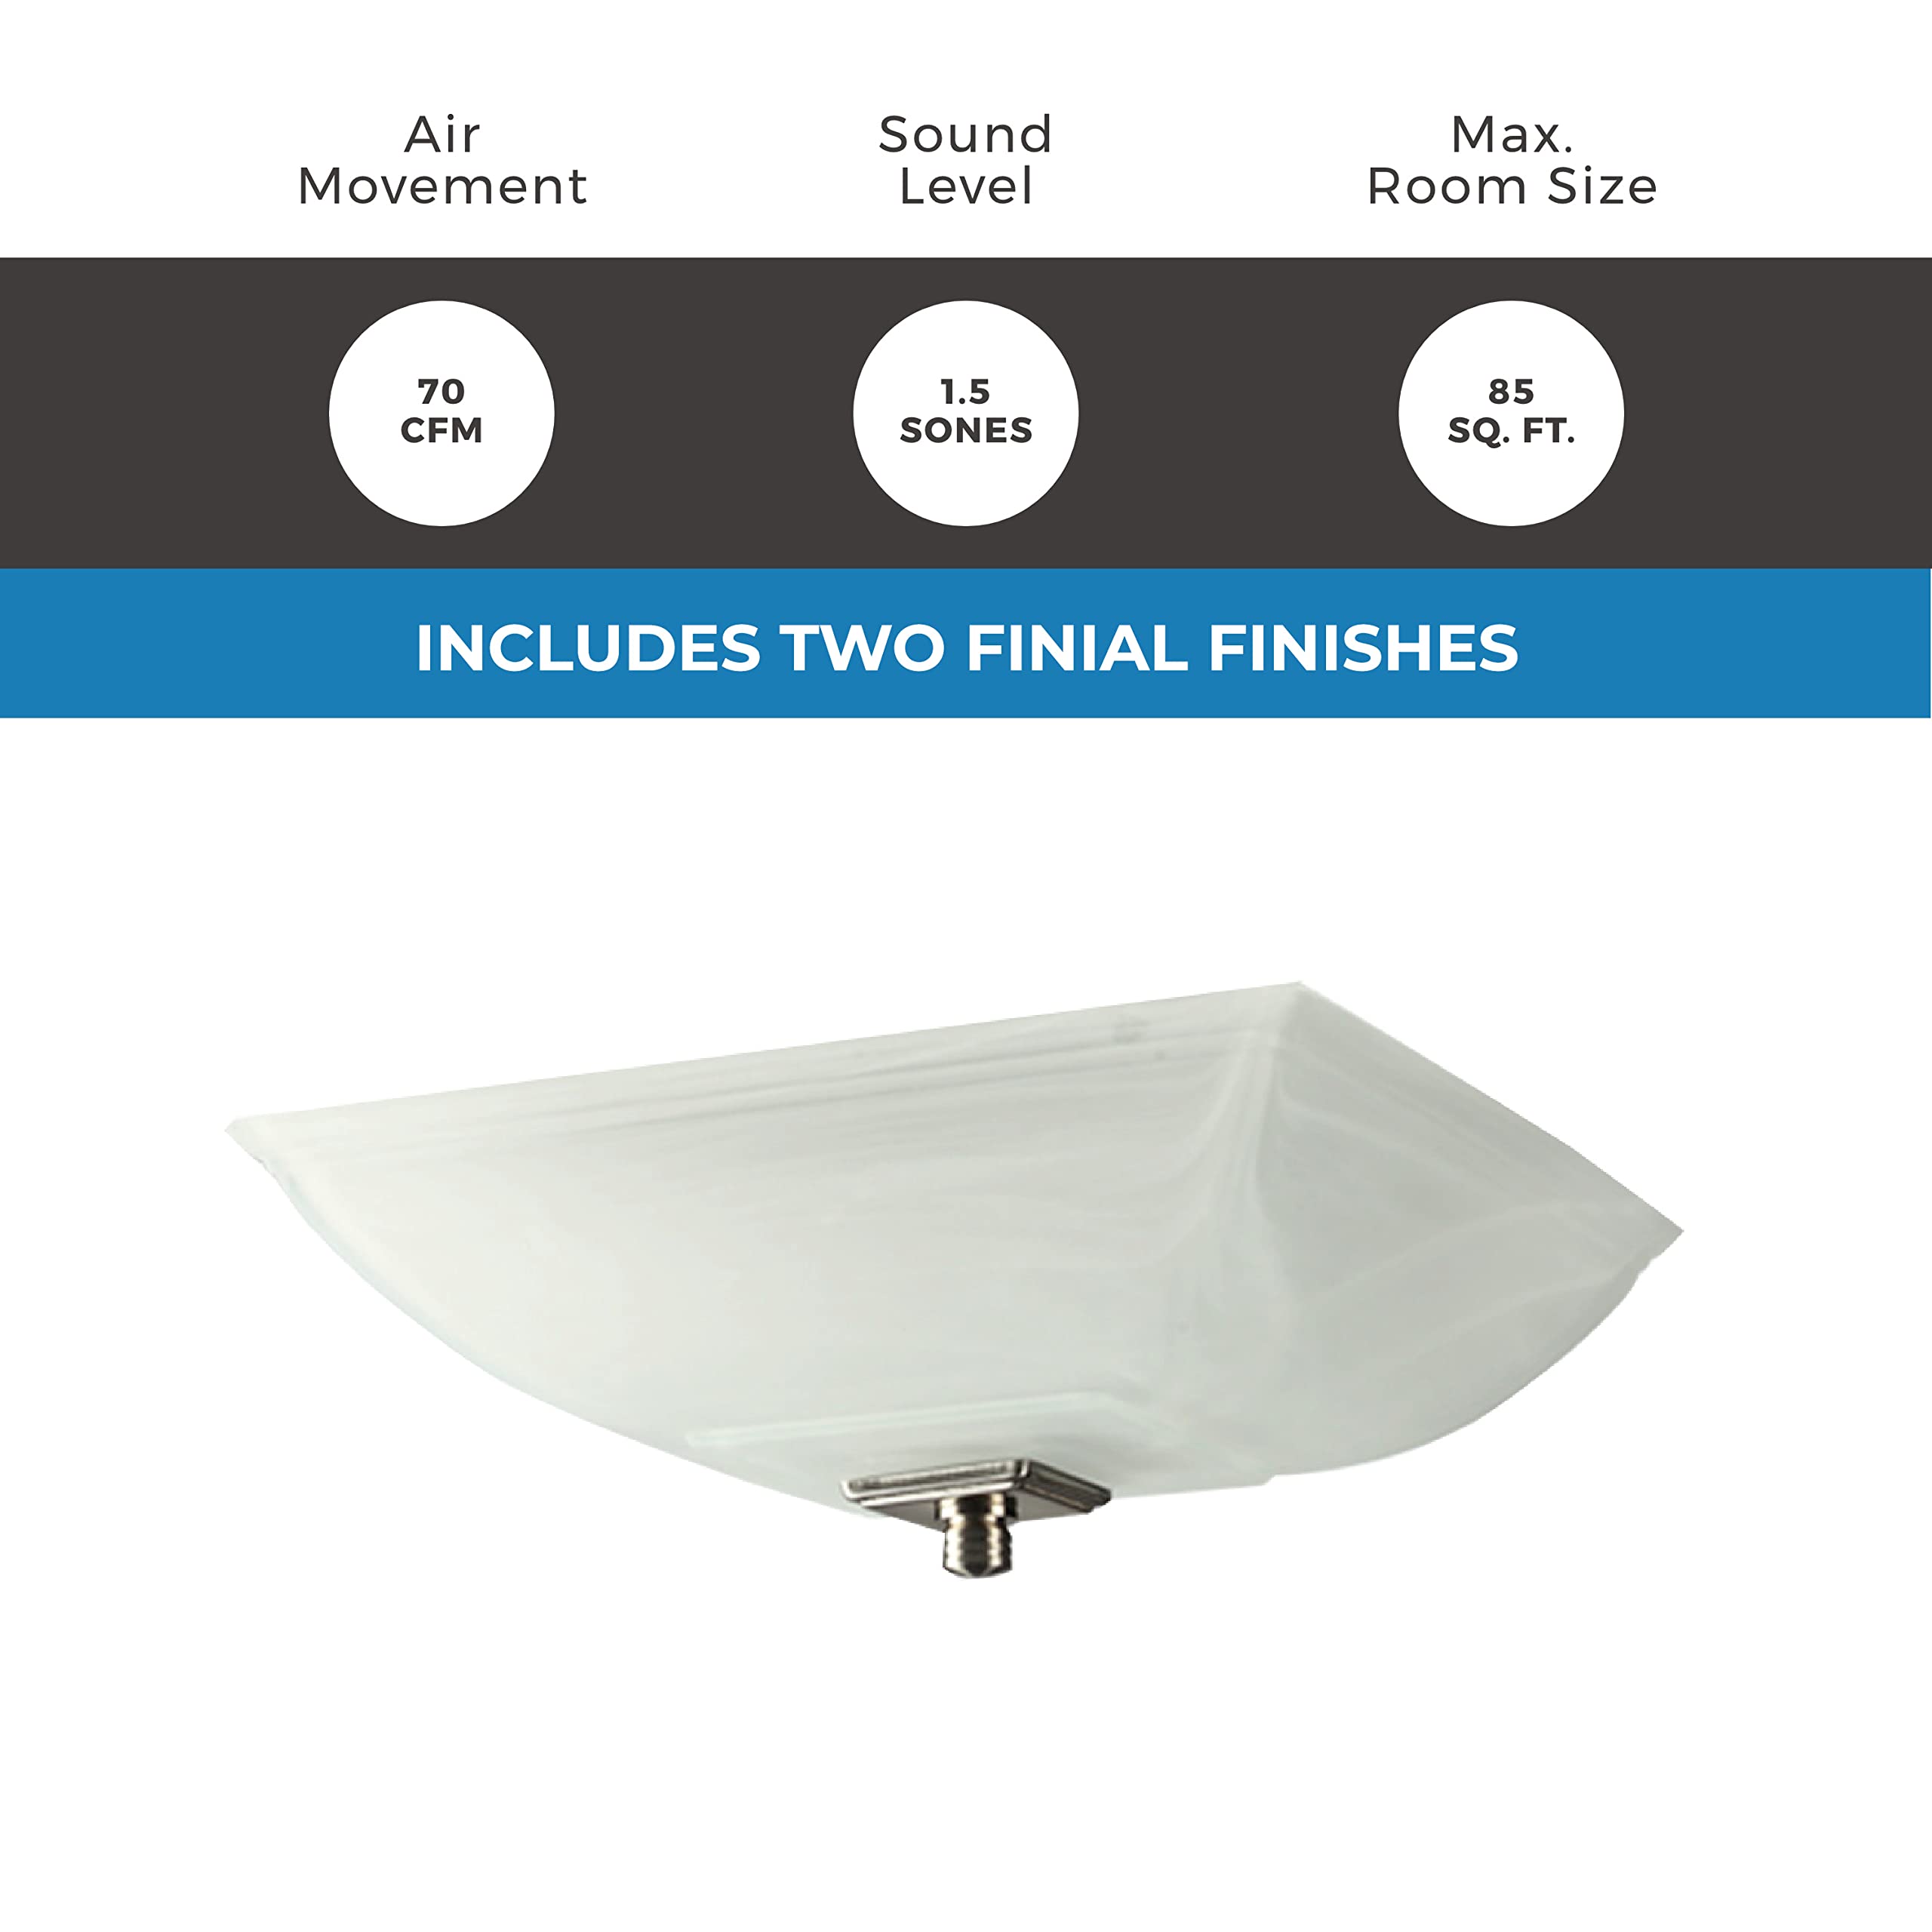 Lift Bridge Kitchen & Bath Decorative Square 70CFM Ceiling Bath Fan with Light and Glass Globe, Brushed Nickel or Oil Rubbed Bronze, Requires 8.11